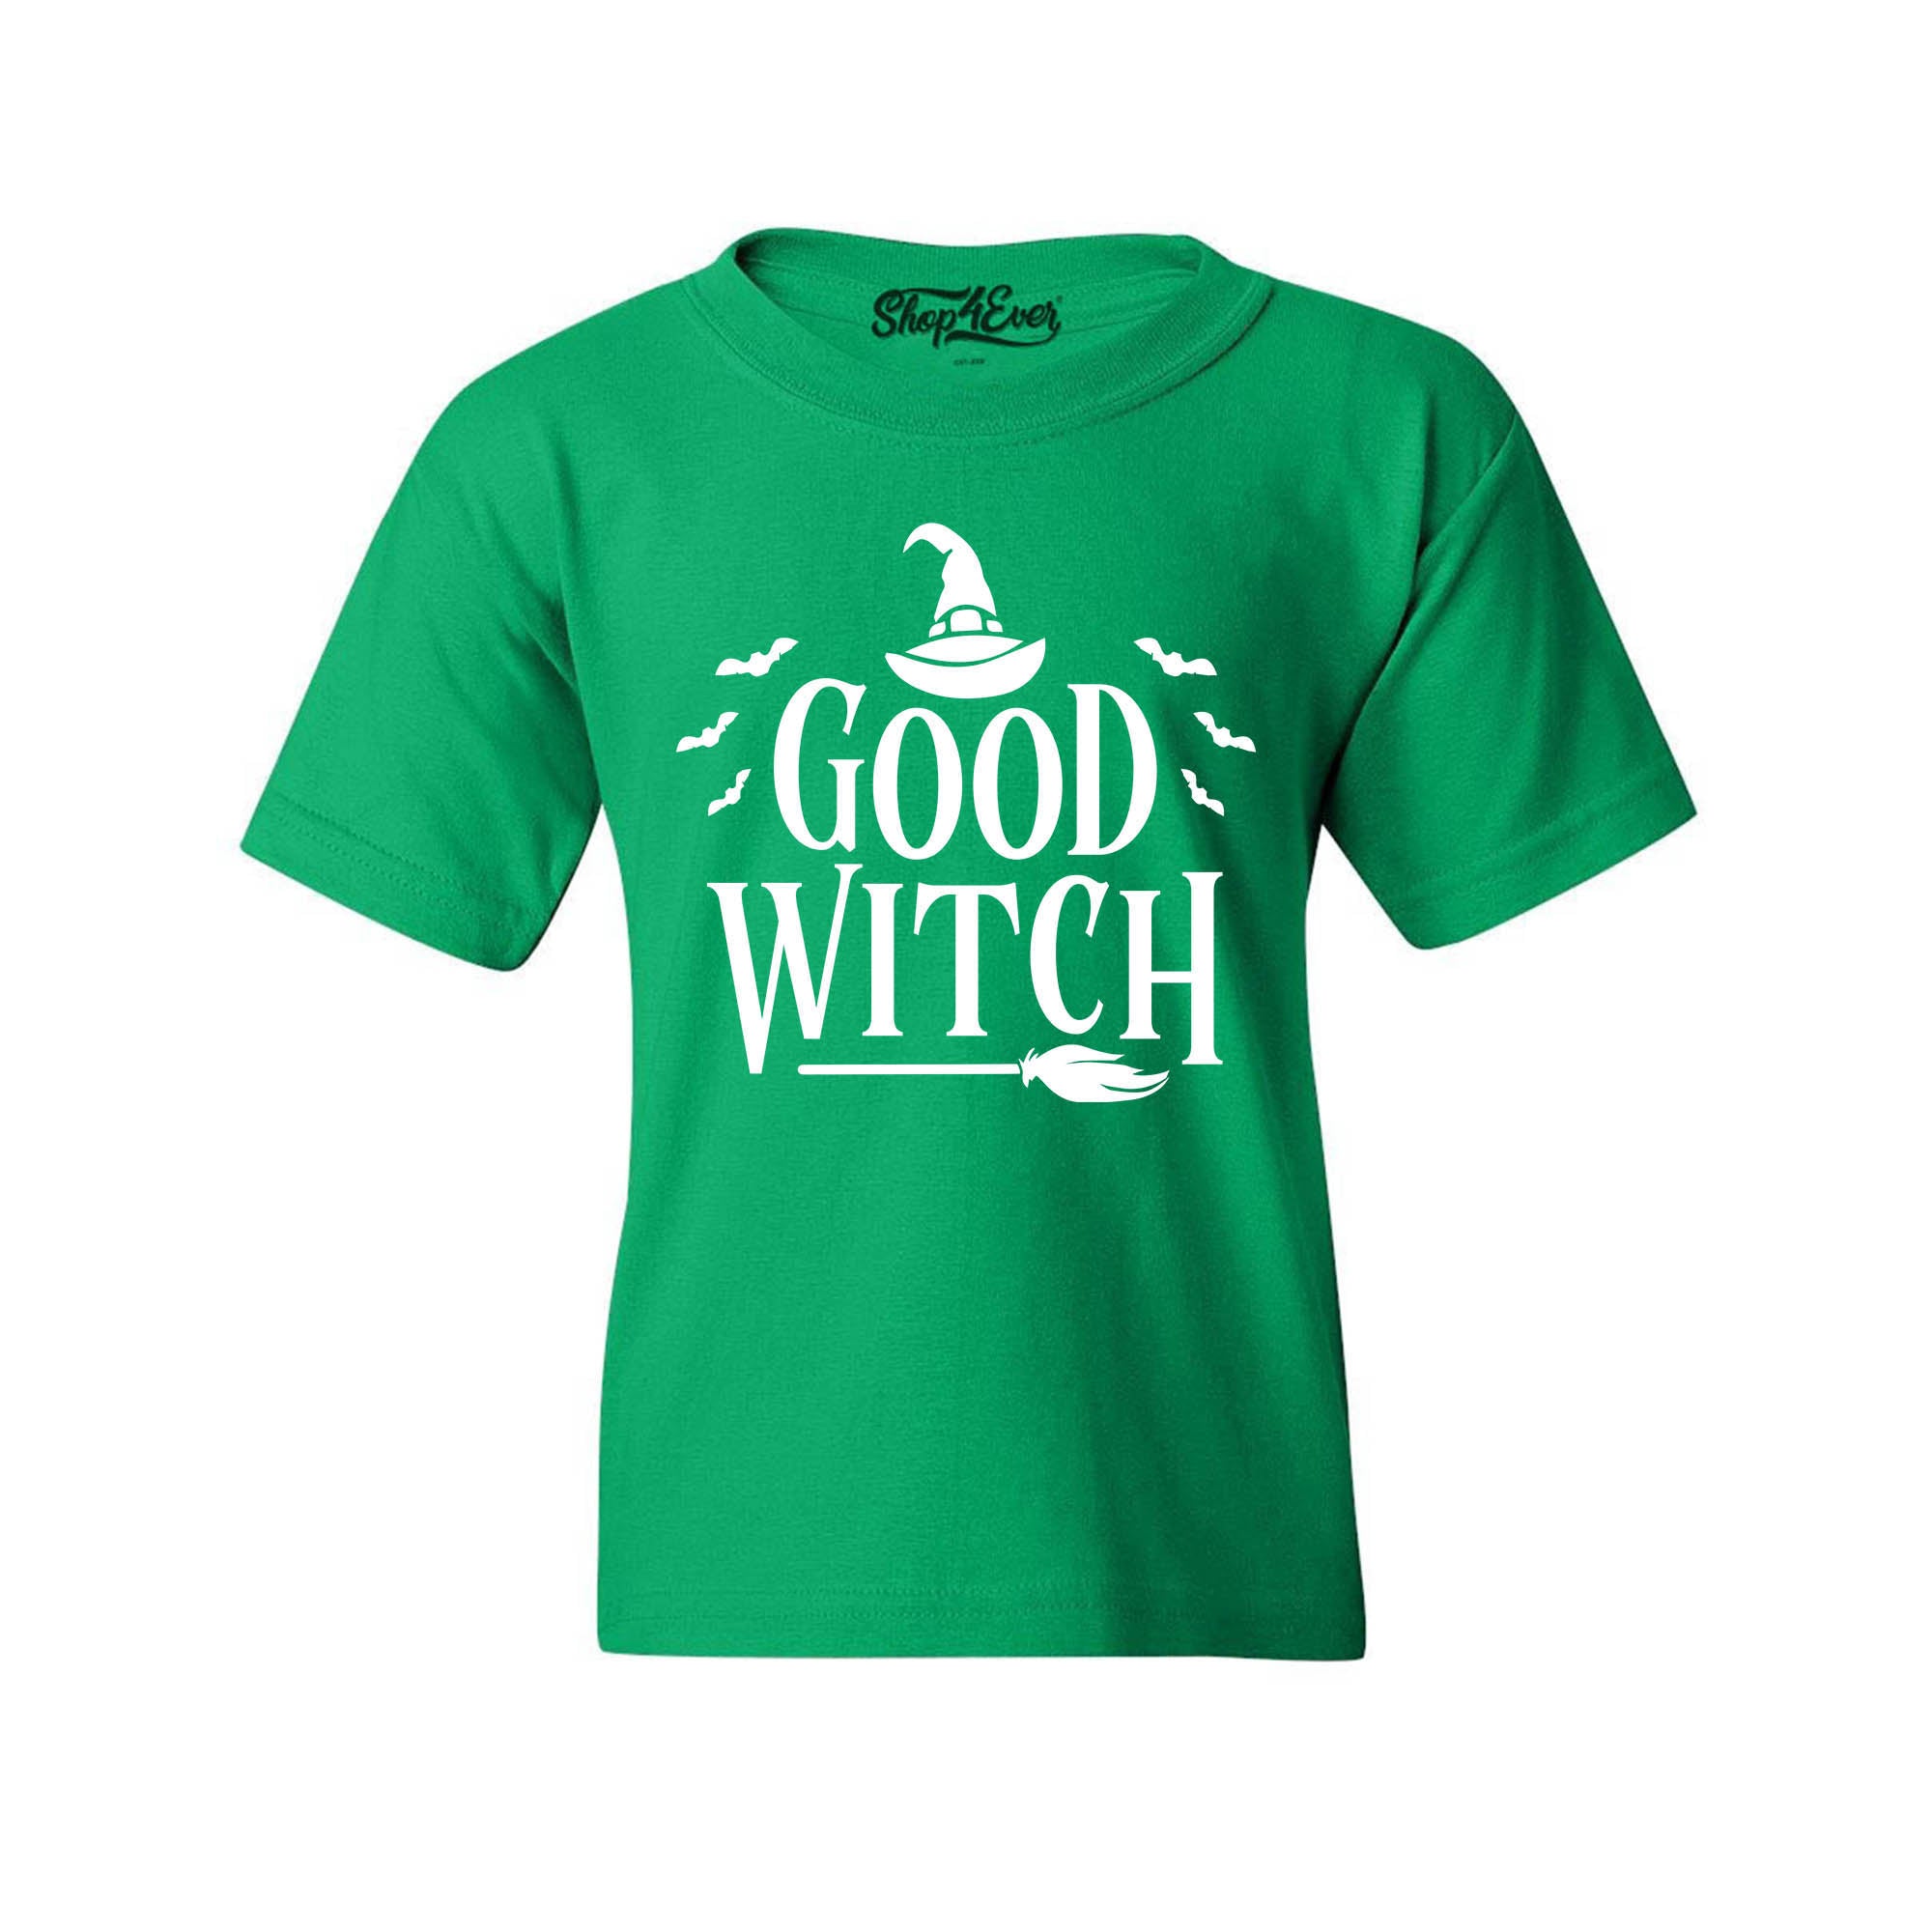 Good Witch ~ Bad Witch Child's Tee Matching Halloween Costumes Youth's T-Shirt